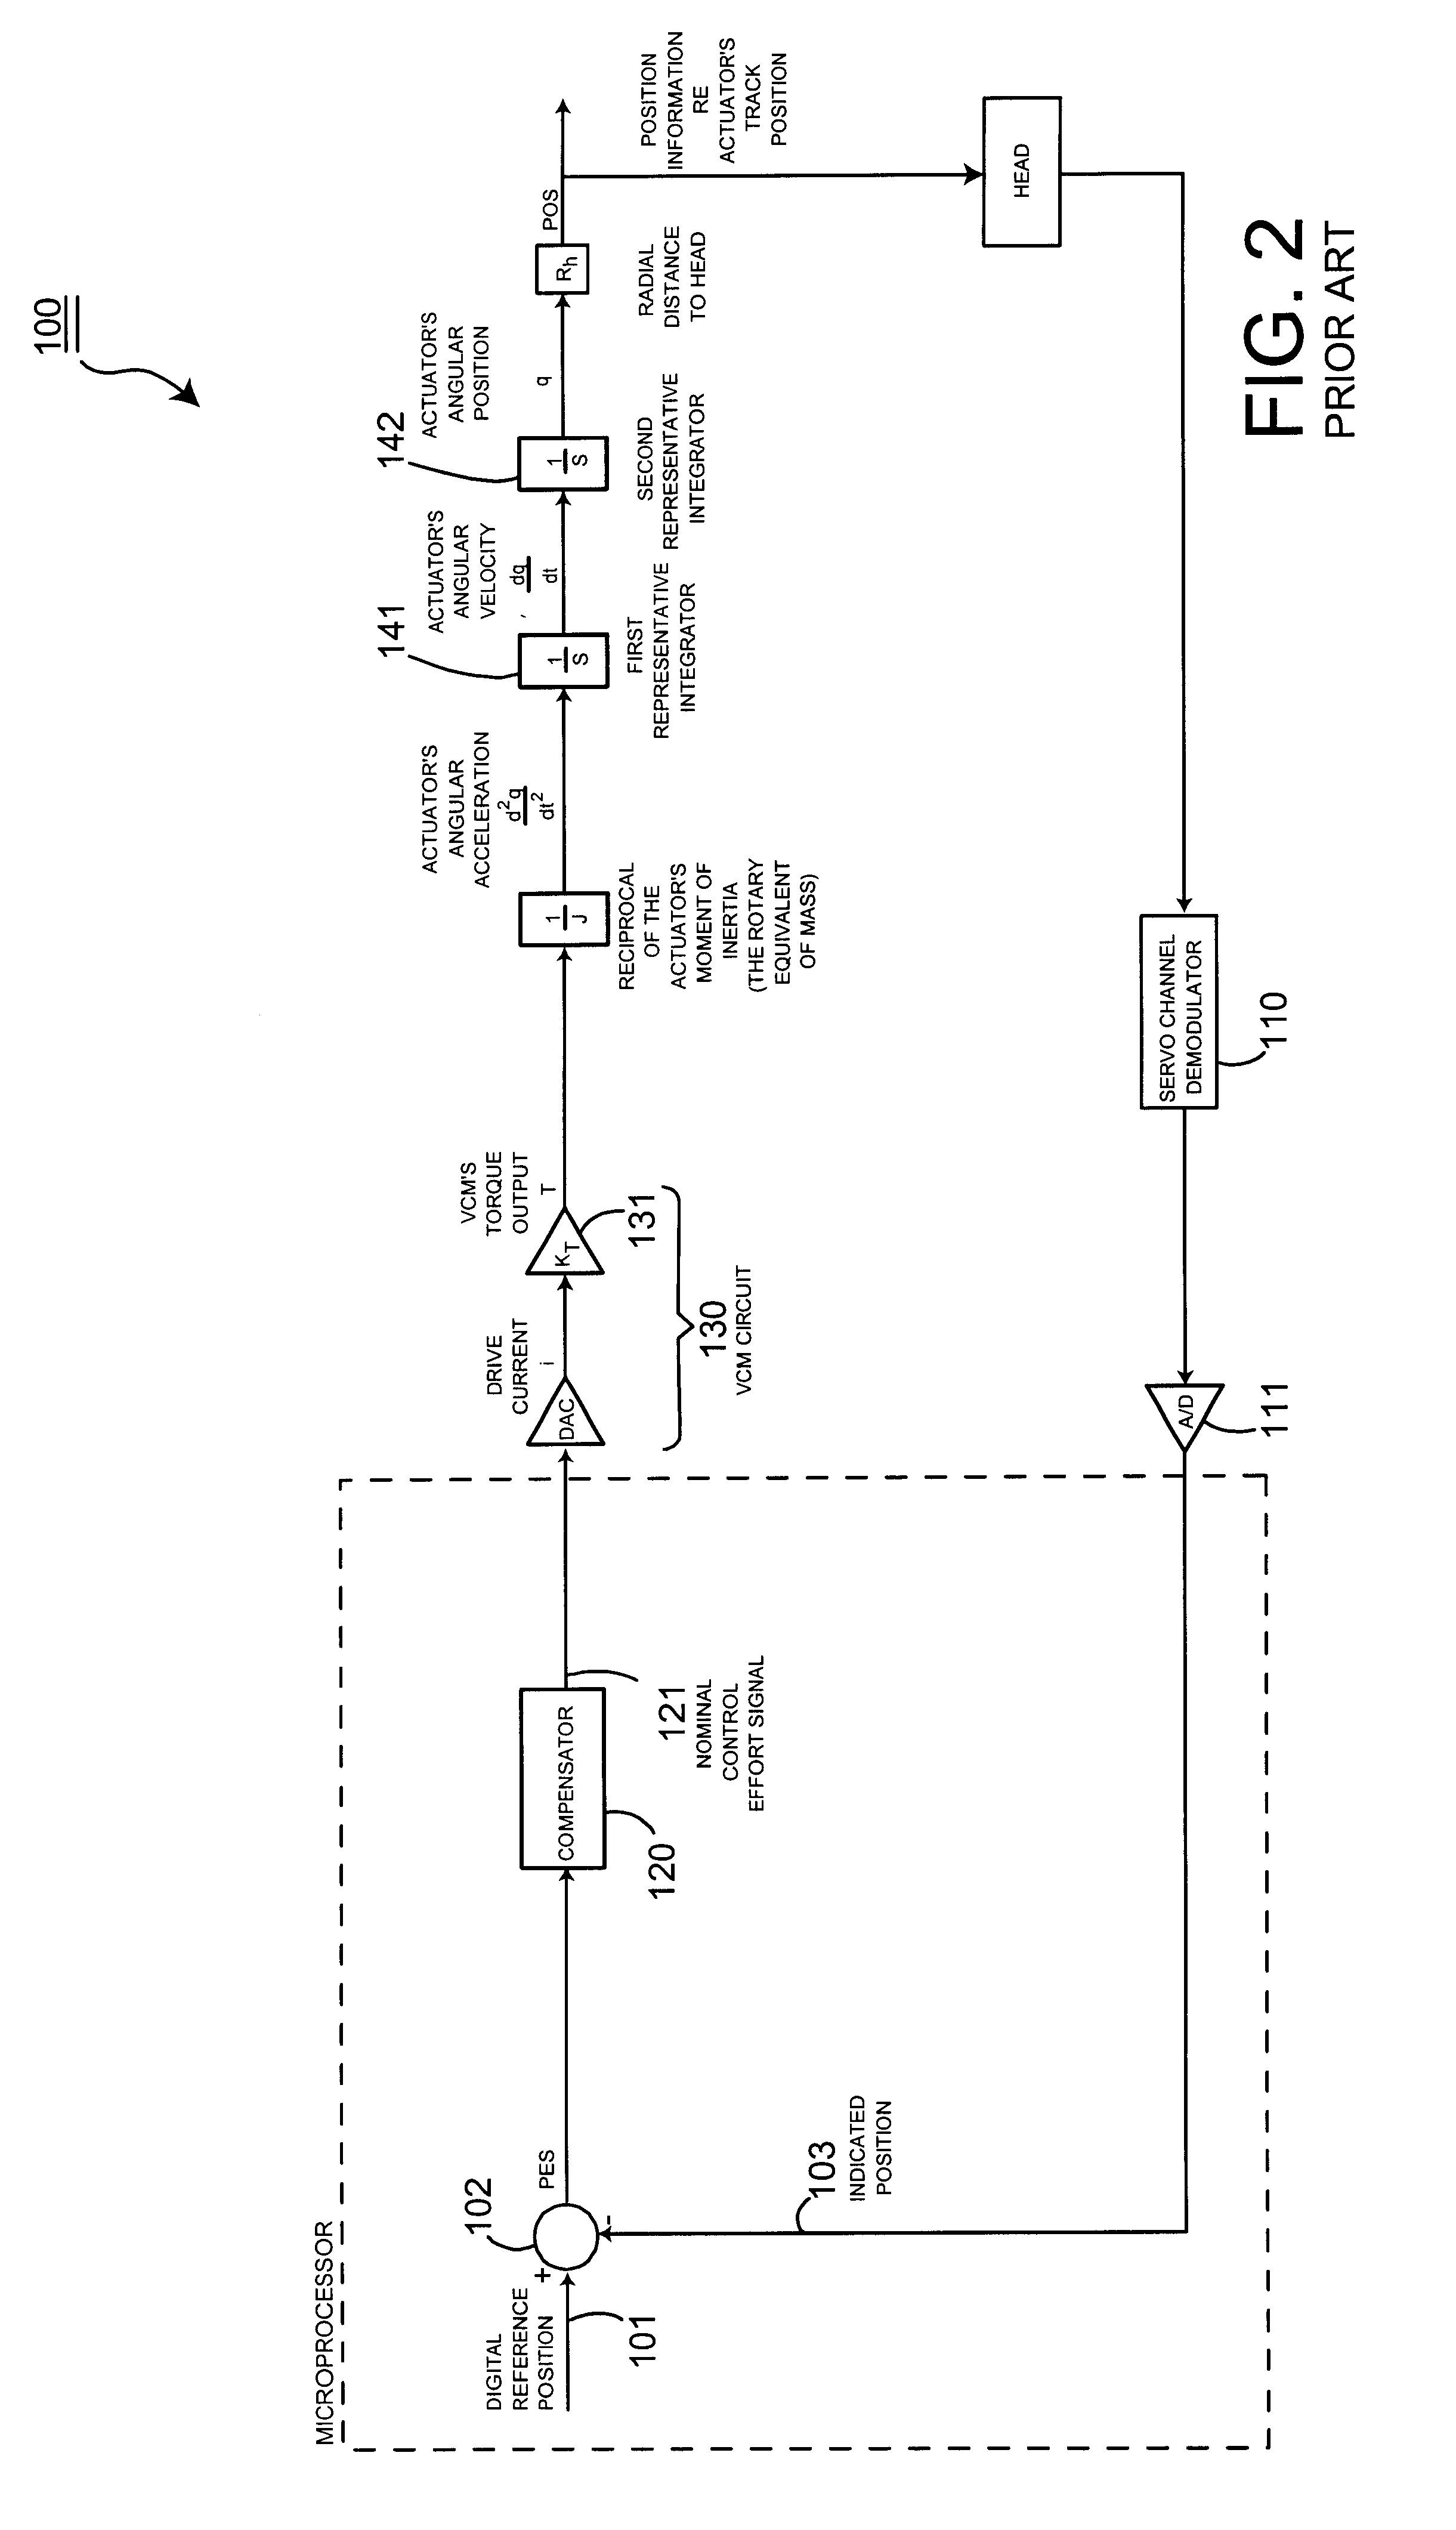 Disk drive employing adaptive feed-forward vibration compensation to enhance a retry operation